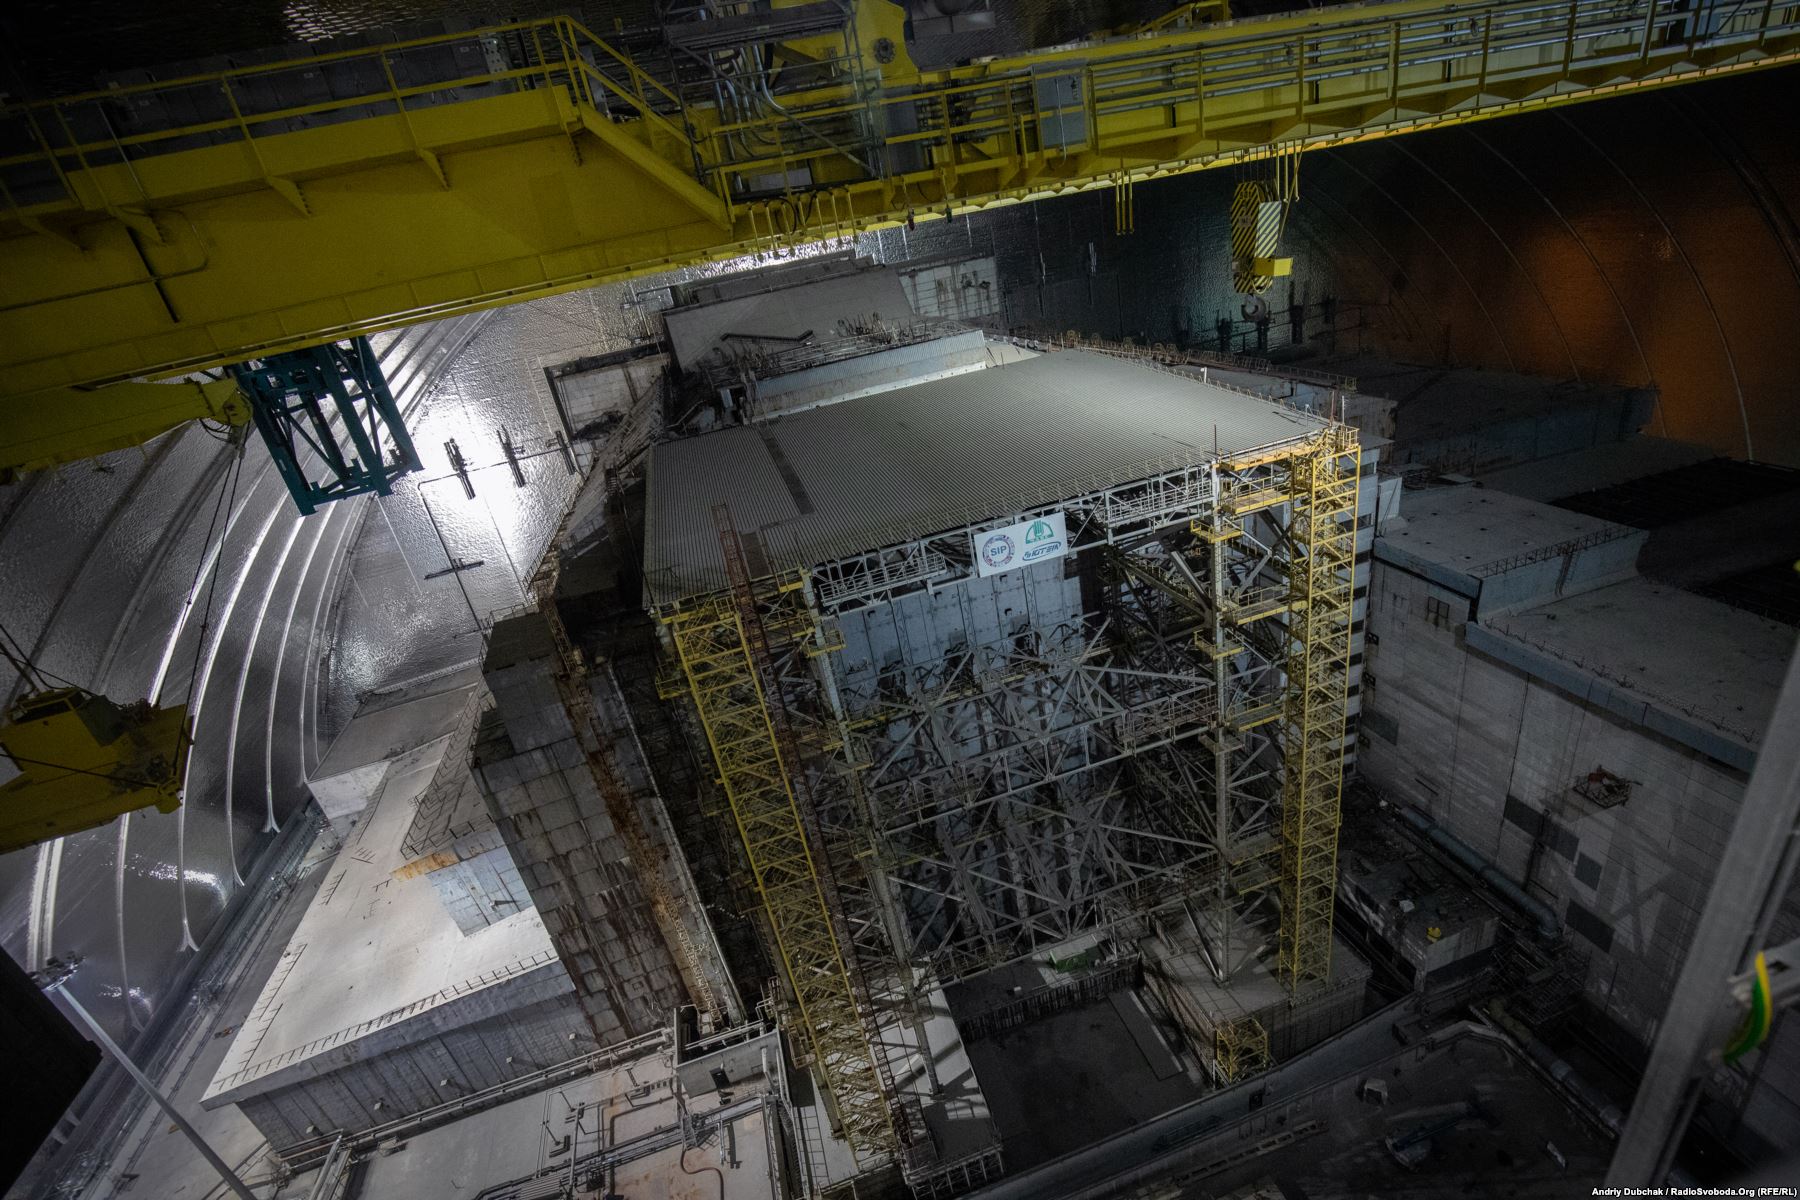 A new steel structure was built under the containment shield to support the decaying concrete sarcophagus in Chernobyl's reactor number four. Eventually, officials plan to dismantle the sarcophagus and remove the remaining nuclear fuel from the plant. Photo by: Andriy Dubchak